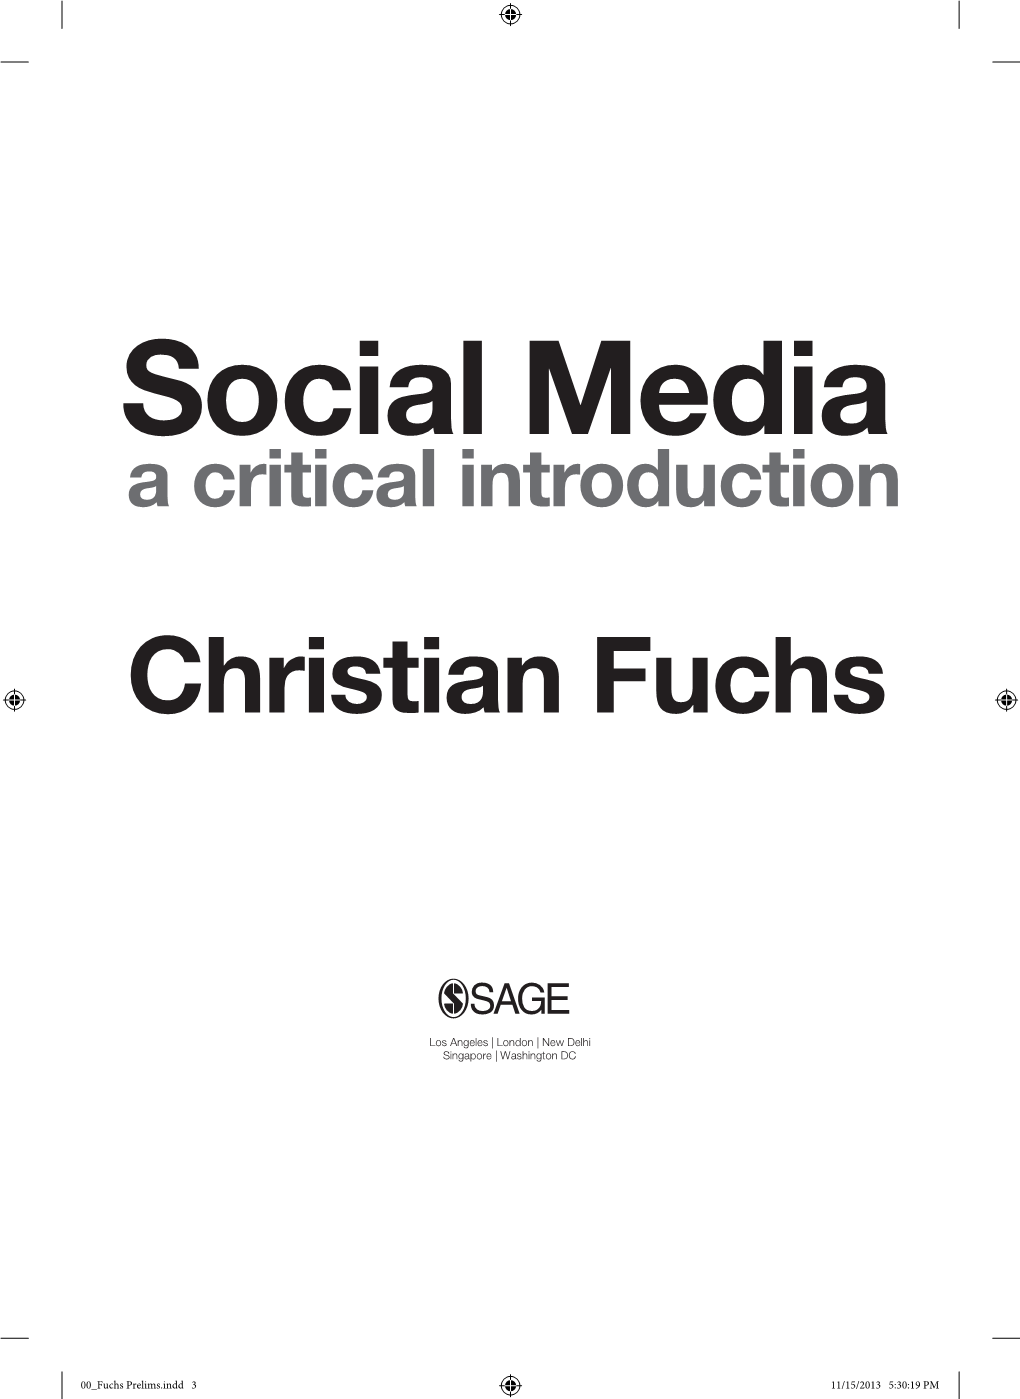 In Social Media: a Critical Introduction